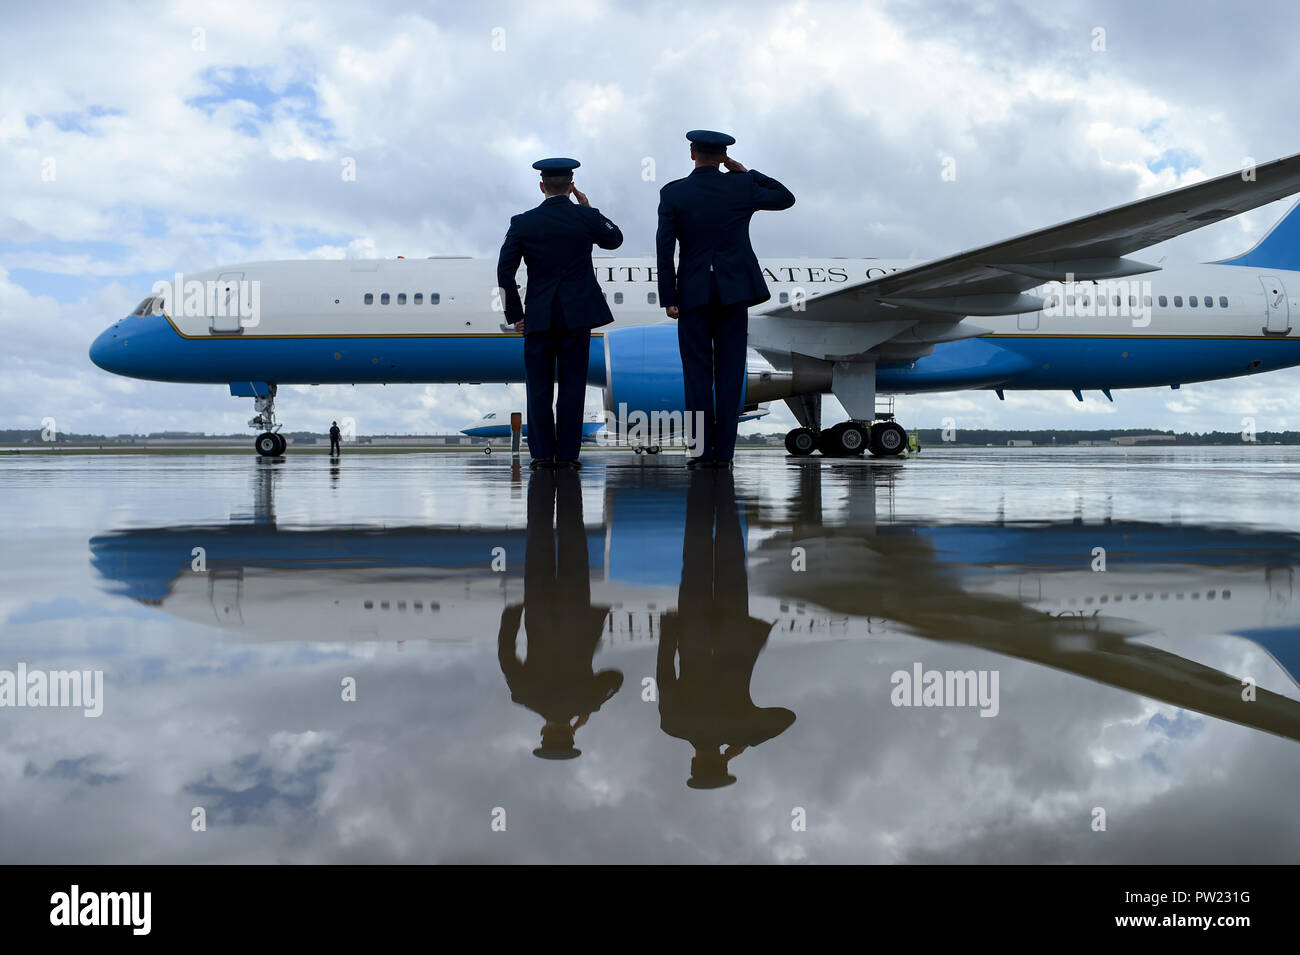 Staff Sgt. Joseph Shank, (left) and Maj. John Querl render salutes as Vice President Mike Pence departs Joint Base Andrews, Md., Oct. 10, 2018. The 89th Airlift Wing provides global Special Air Mission airlift, logistics, aerial port and communications for the president, vice president, cabinet members, combatant commanders and other senior military and elected leaders as tasked by the White House, Air Force chief of staff and Air Mobility Command. (U.S. Air Force photo/Staff Sgt. Kenny Holston) Stock Photo